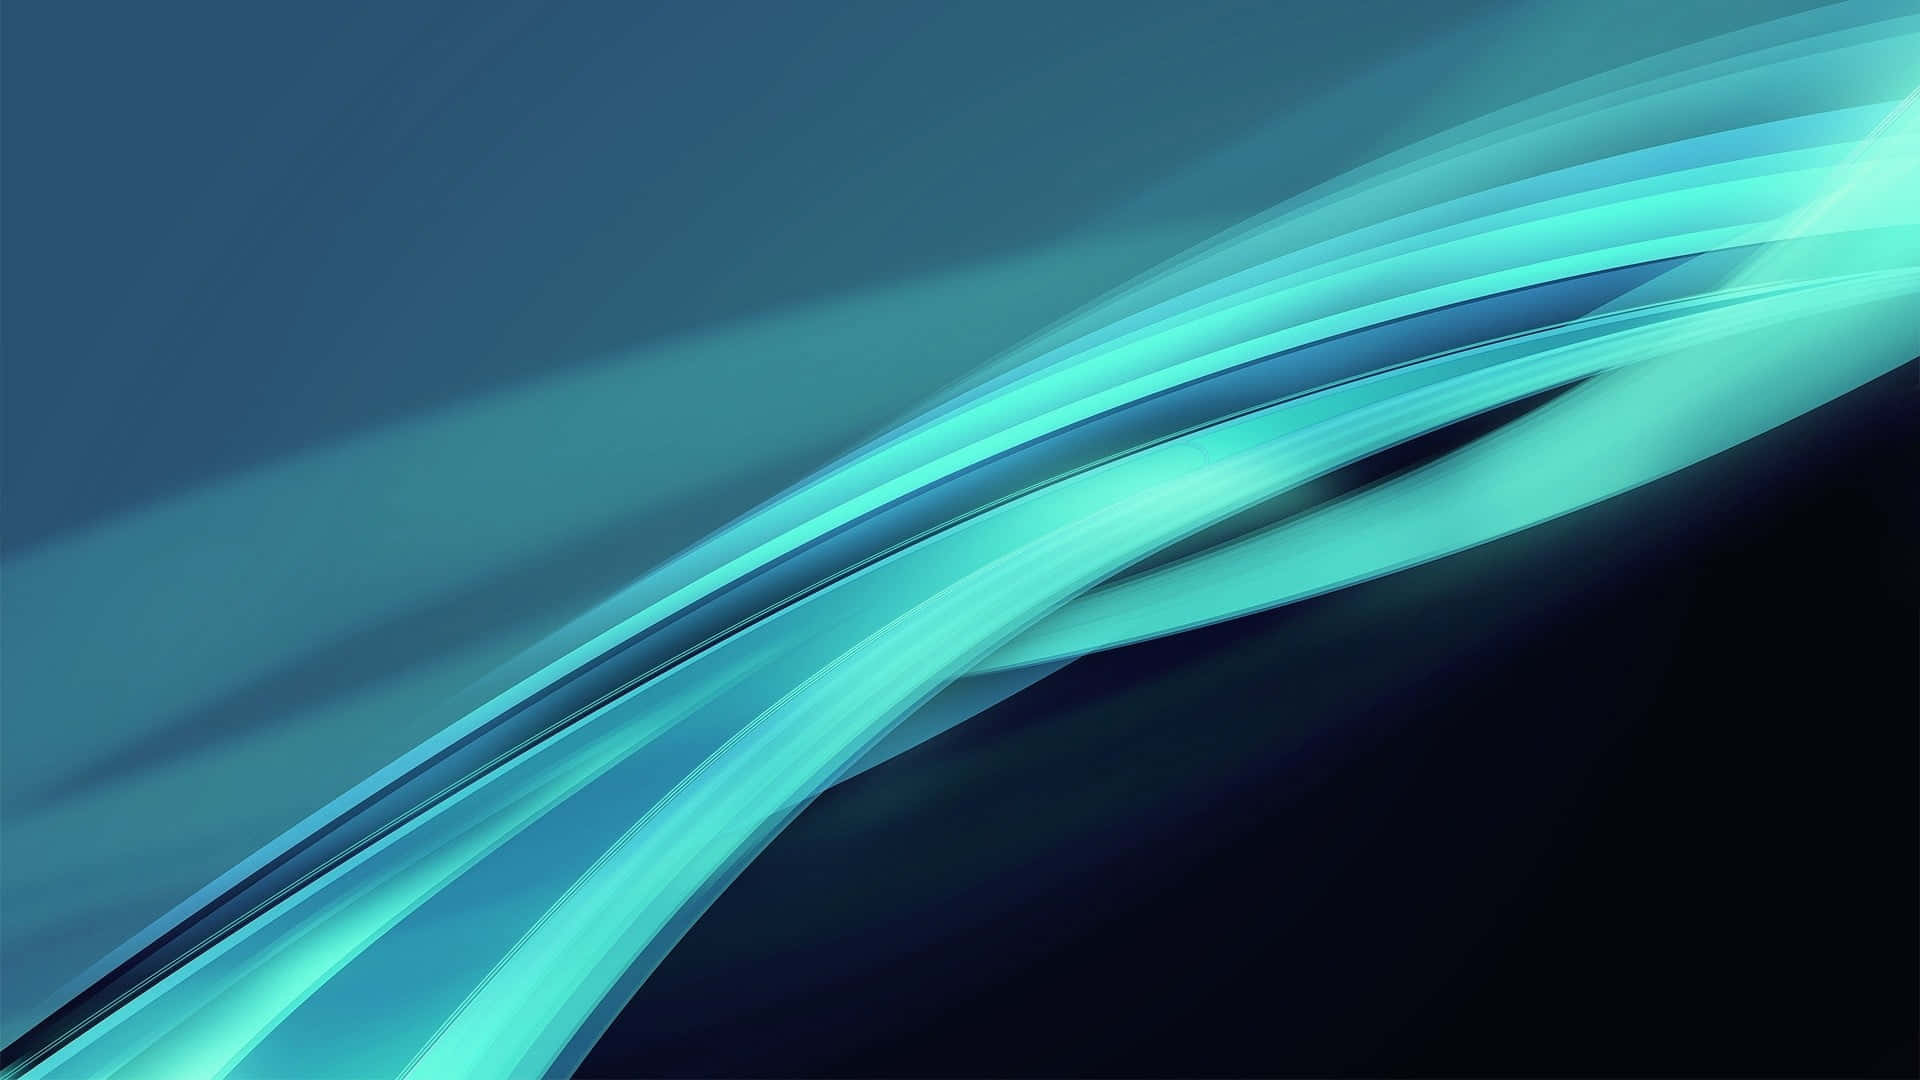 A beautiful cyan abstract background.